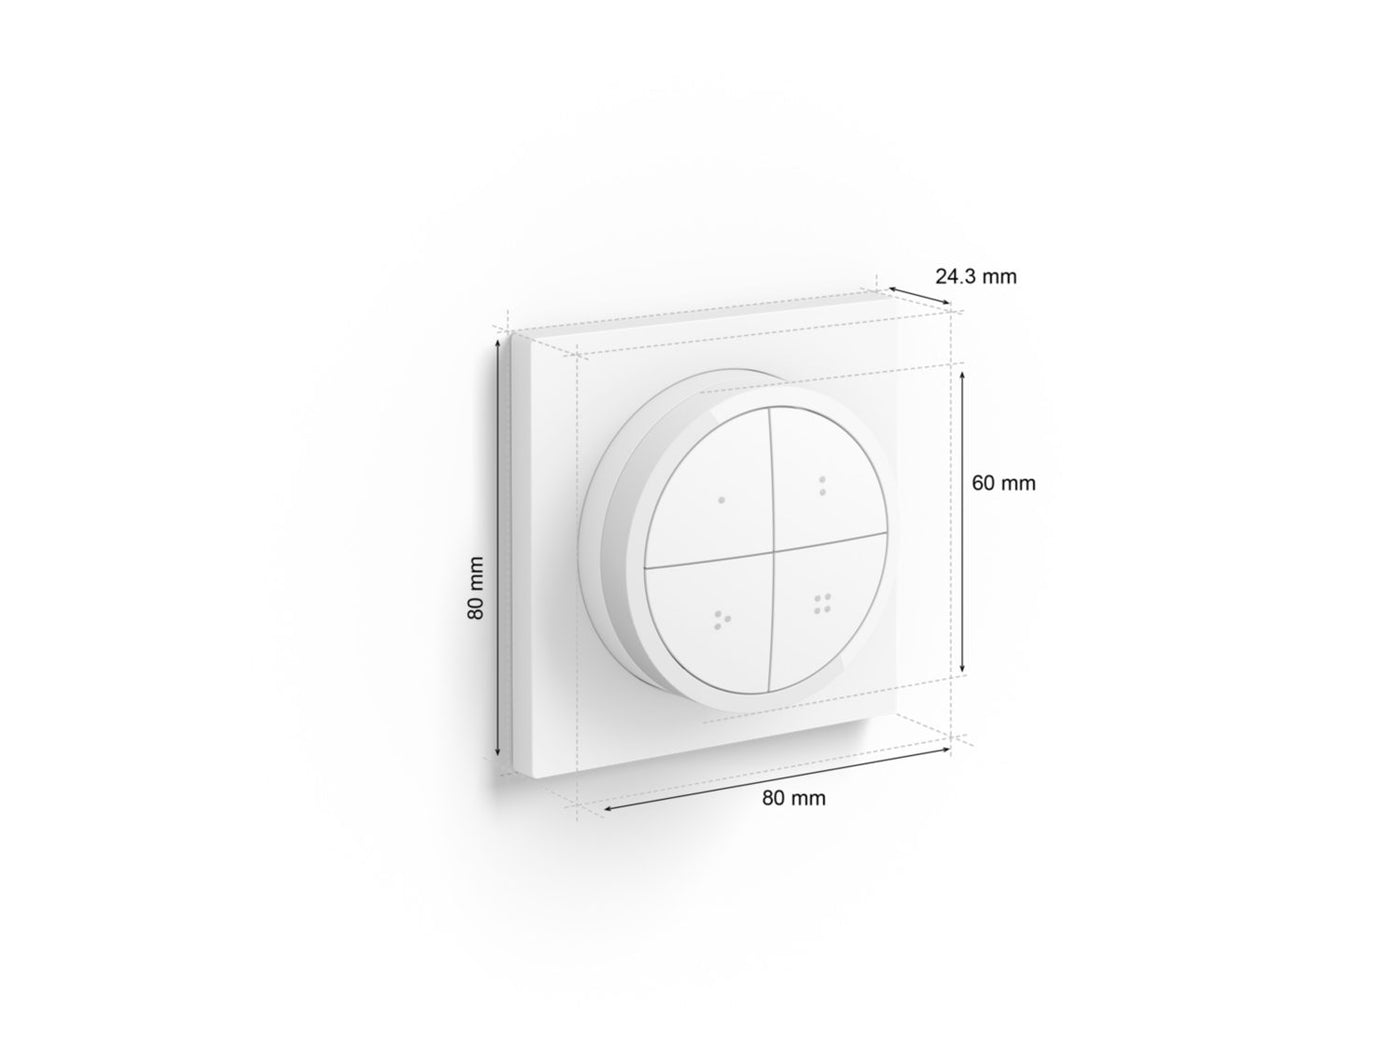 Philips Hue Tap dial - White